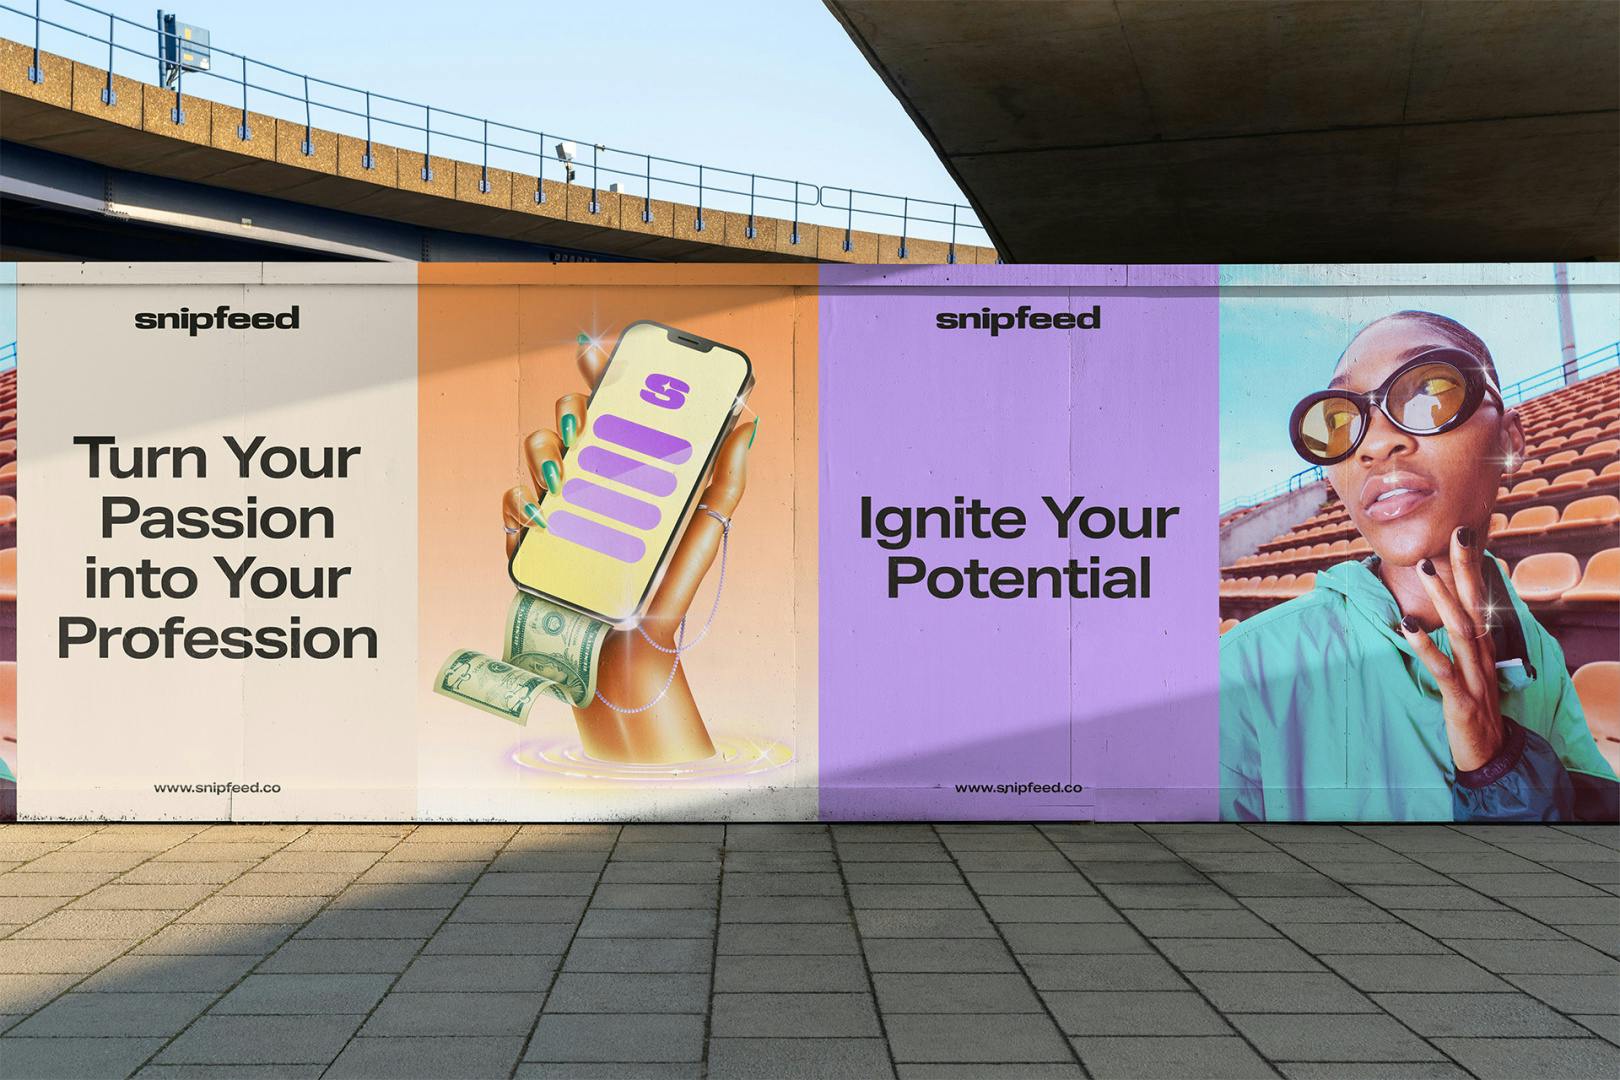 Image shows out-of-home advertising of Snipfeed, which reads 'Turn your passion into your profession' and 'Ignite your potential'